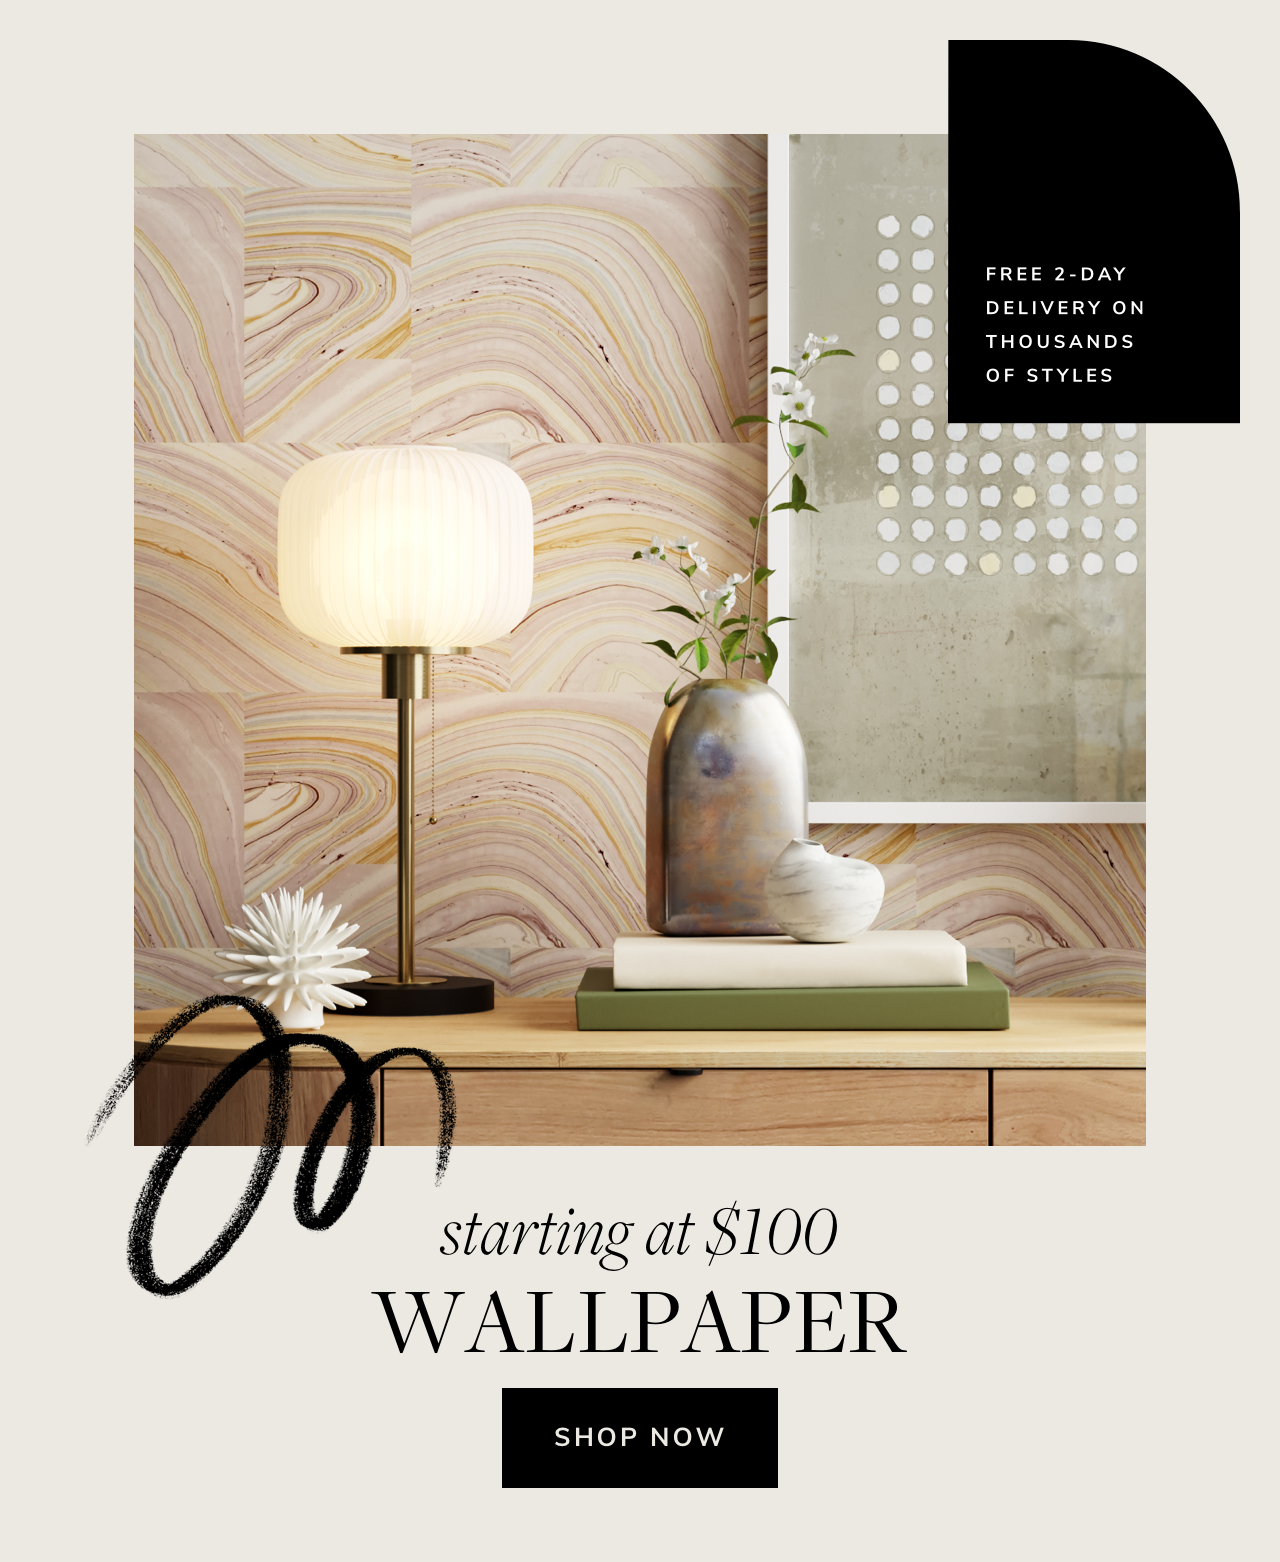 FREE 2-DAY DELIVERY ON THOUSANDS OF STYLES mm'ng at $100 WALLPAPER SHOP NOW 